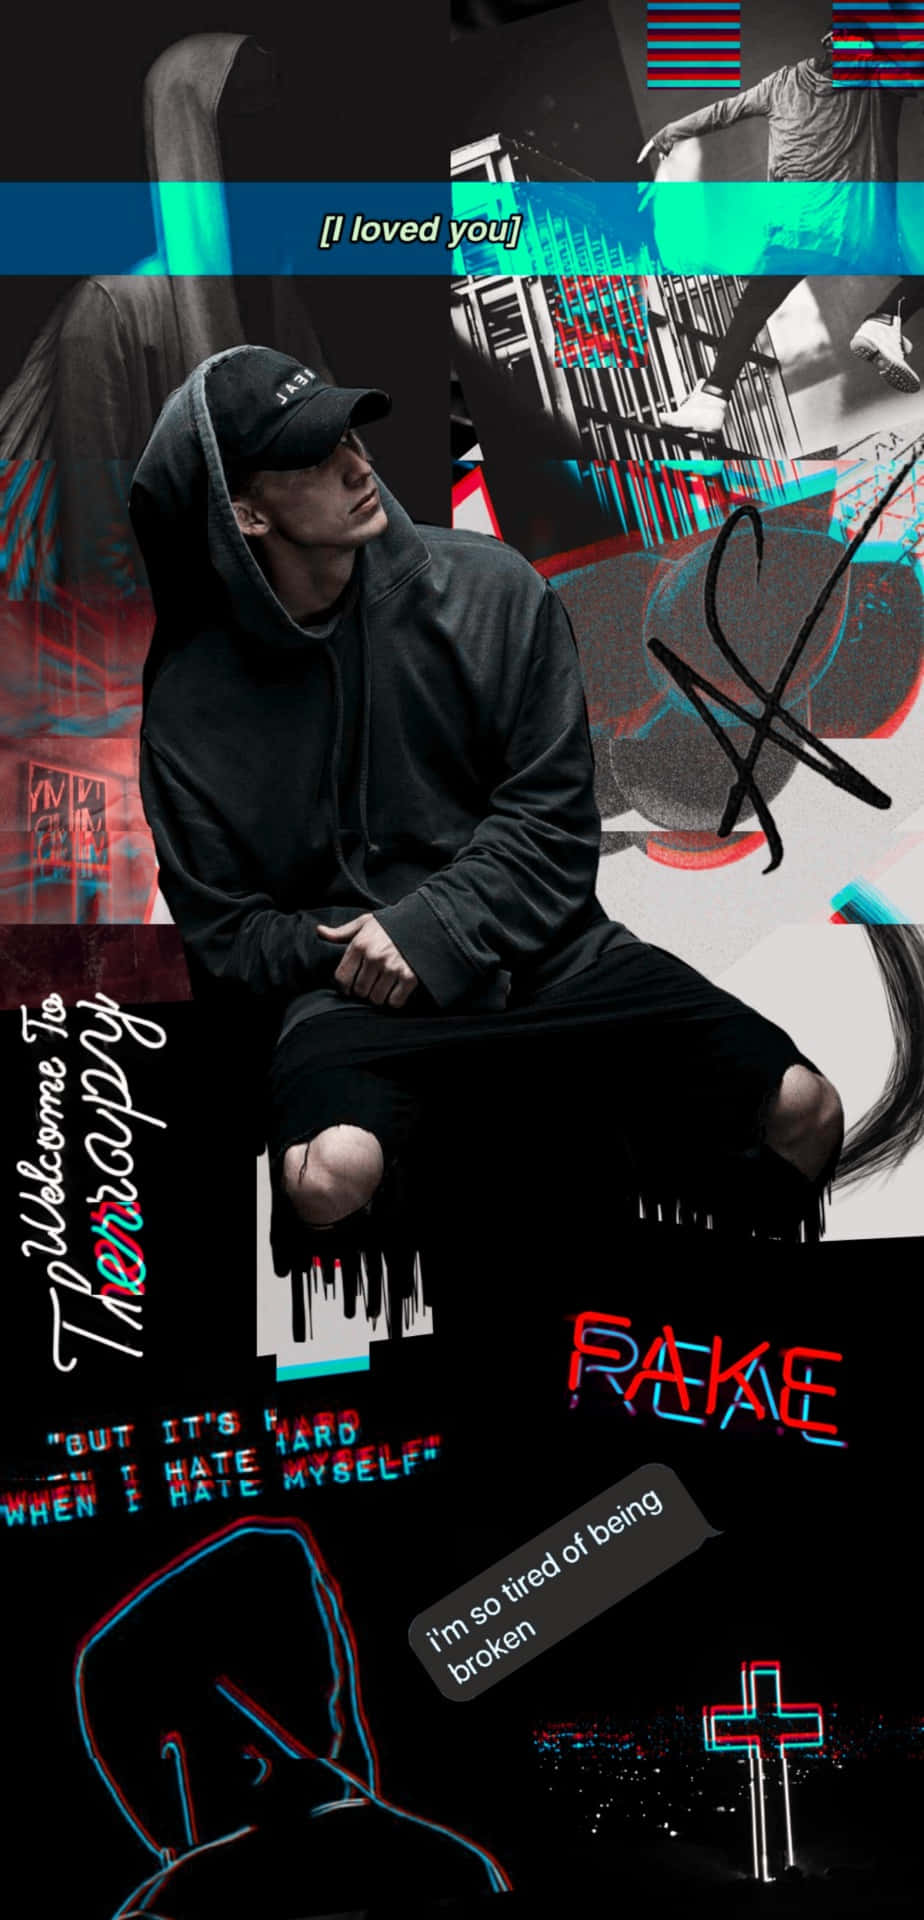 NF the Rapper gets creative with his musical journey Wallpaper